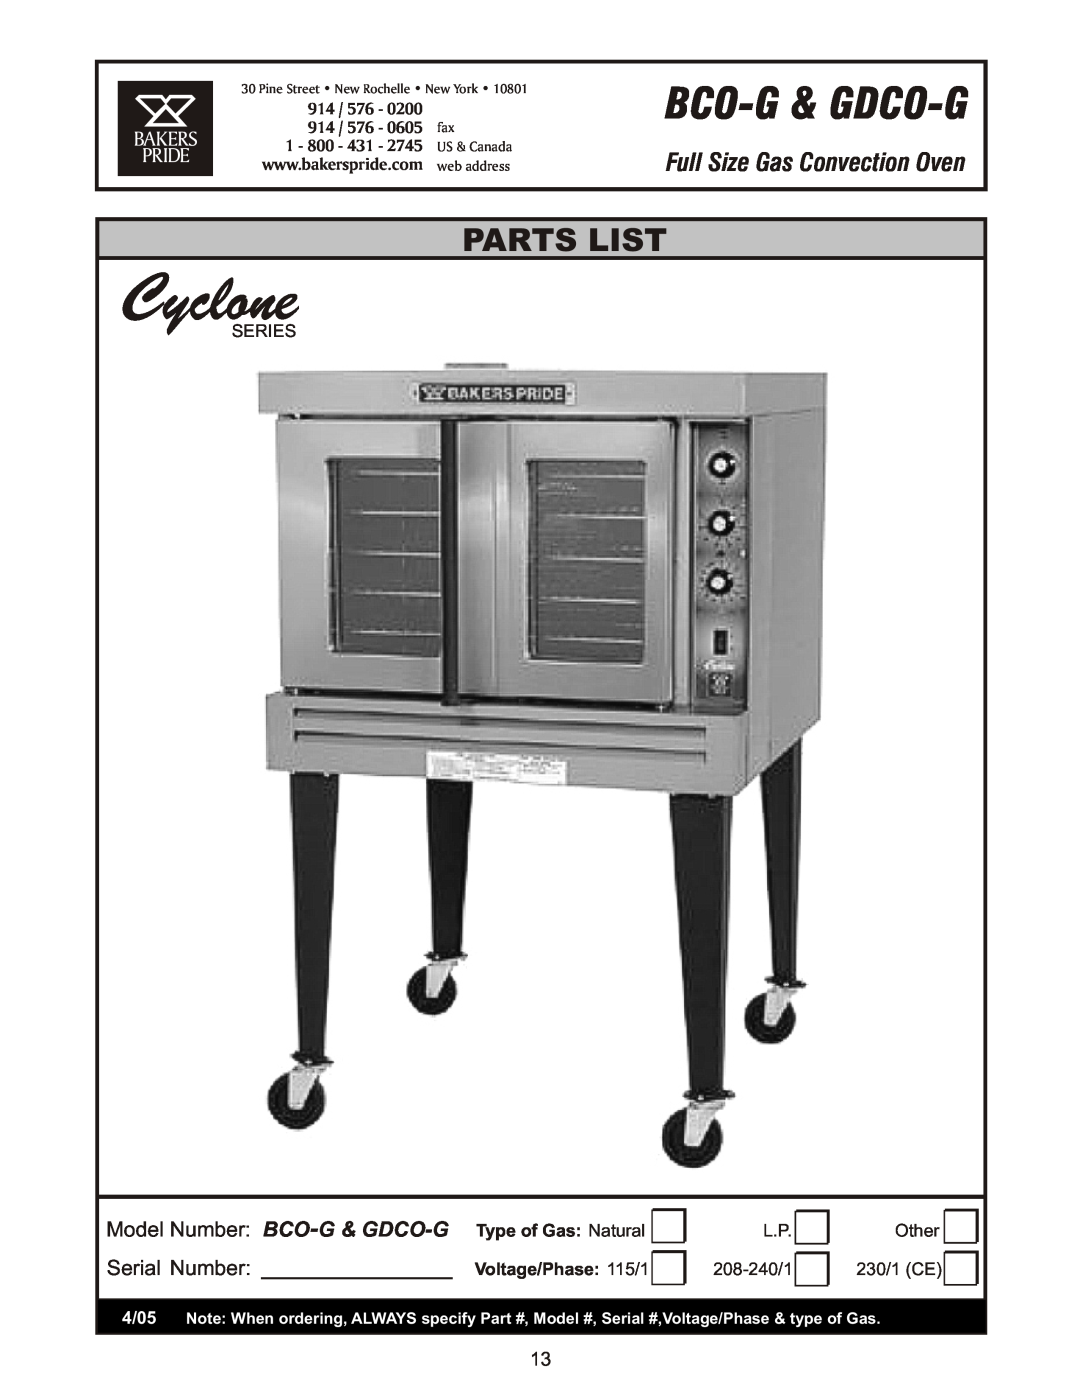 Bakers Pride Oven Full Size Gas Convection Oven, Cyclone, Bco-G & Gdco-G, Parts List, Model Number BCO-G & GDCO-G, 0200 